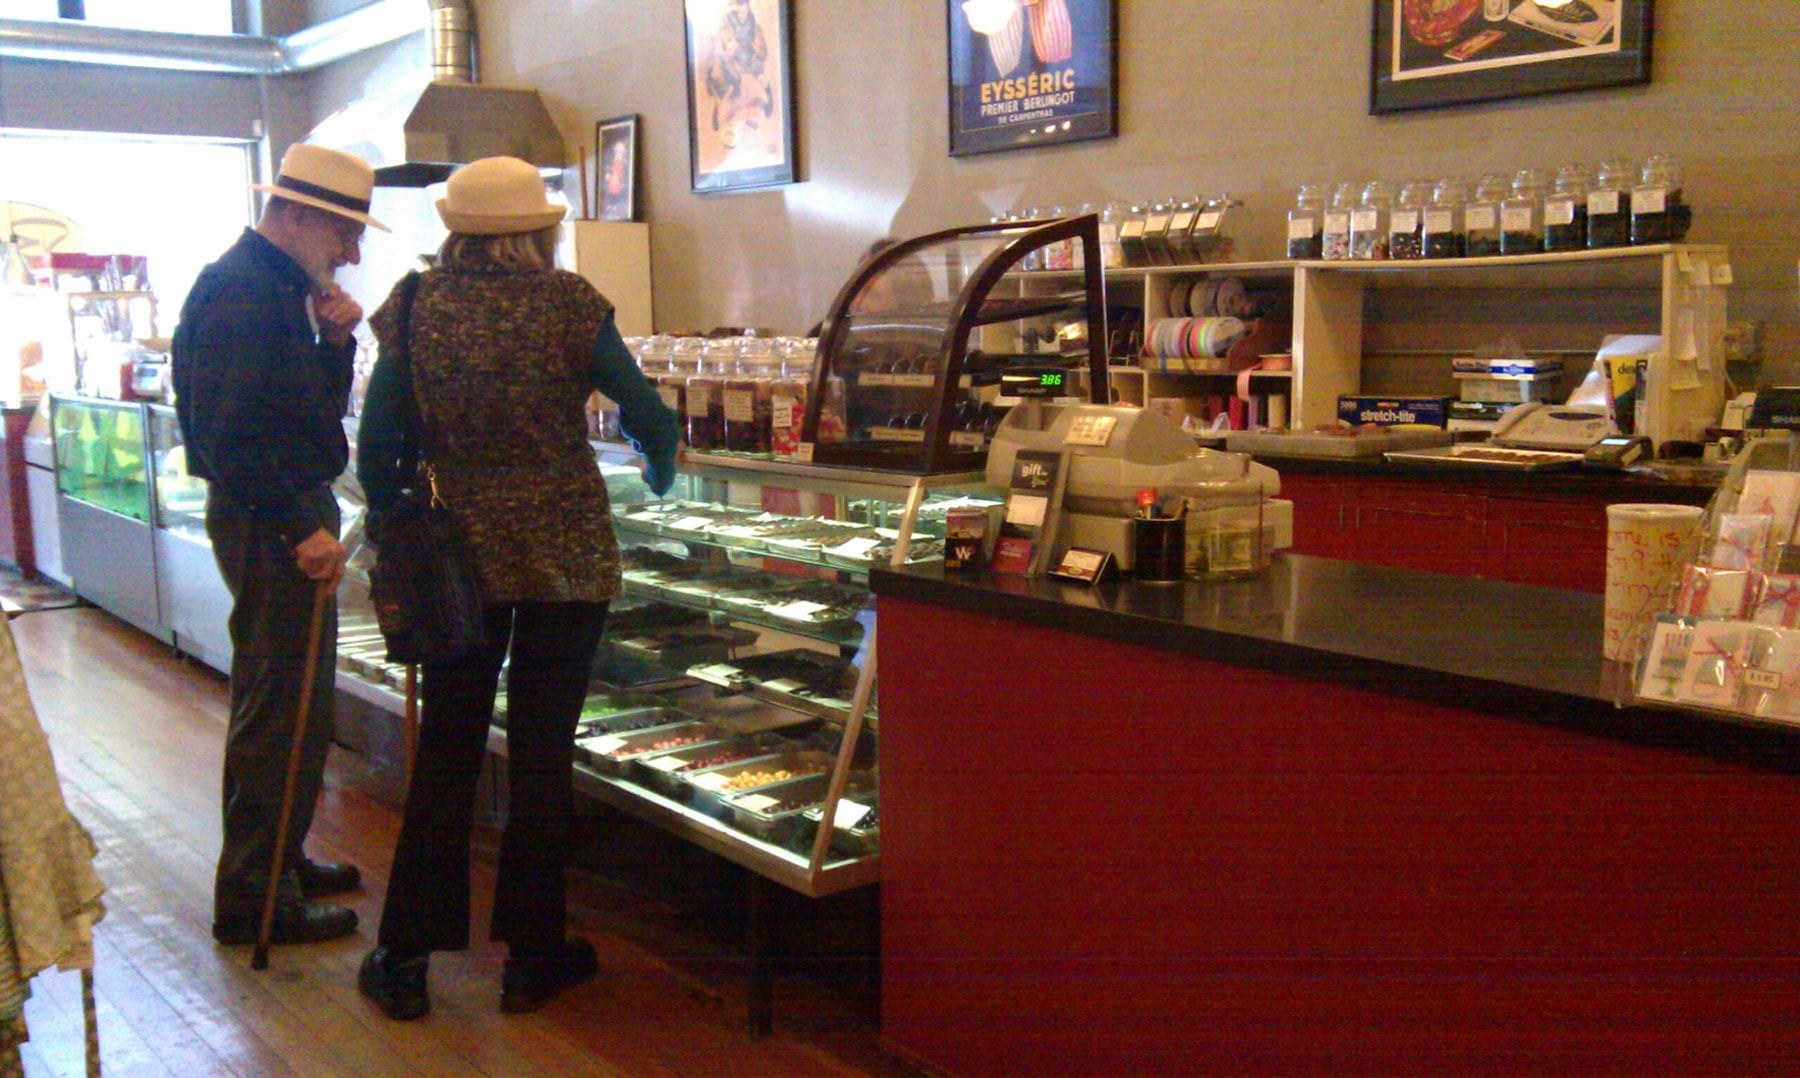 In a quaint local candy store, an older couple both wearing hats and using canes for mobility are browsing for sweet treats.